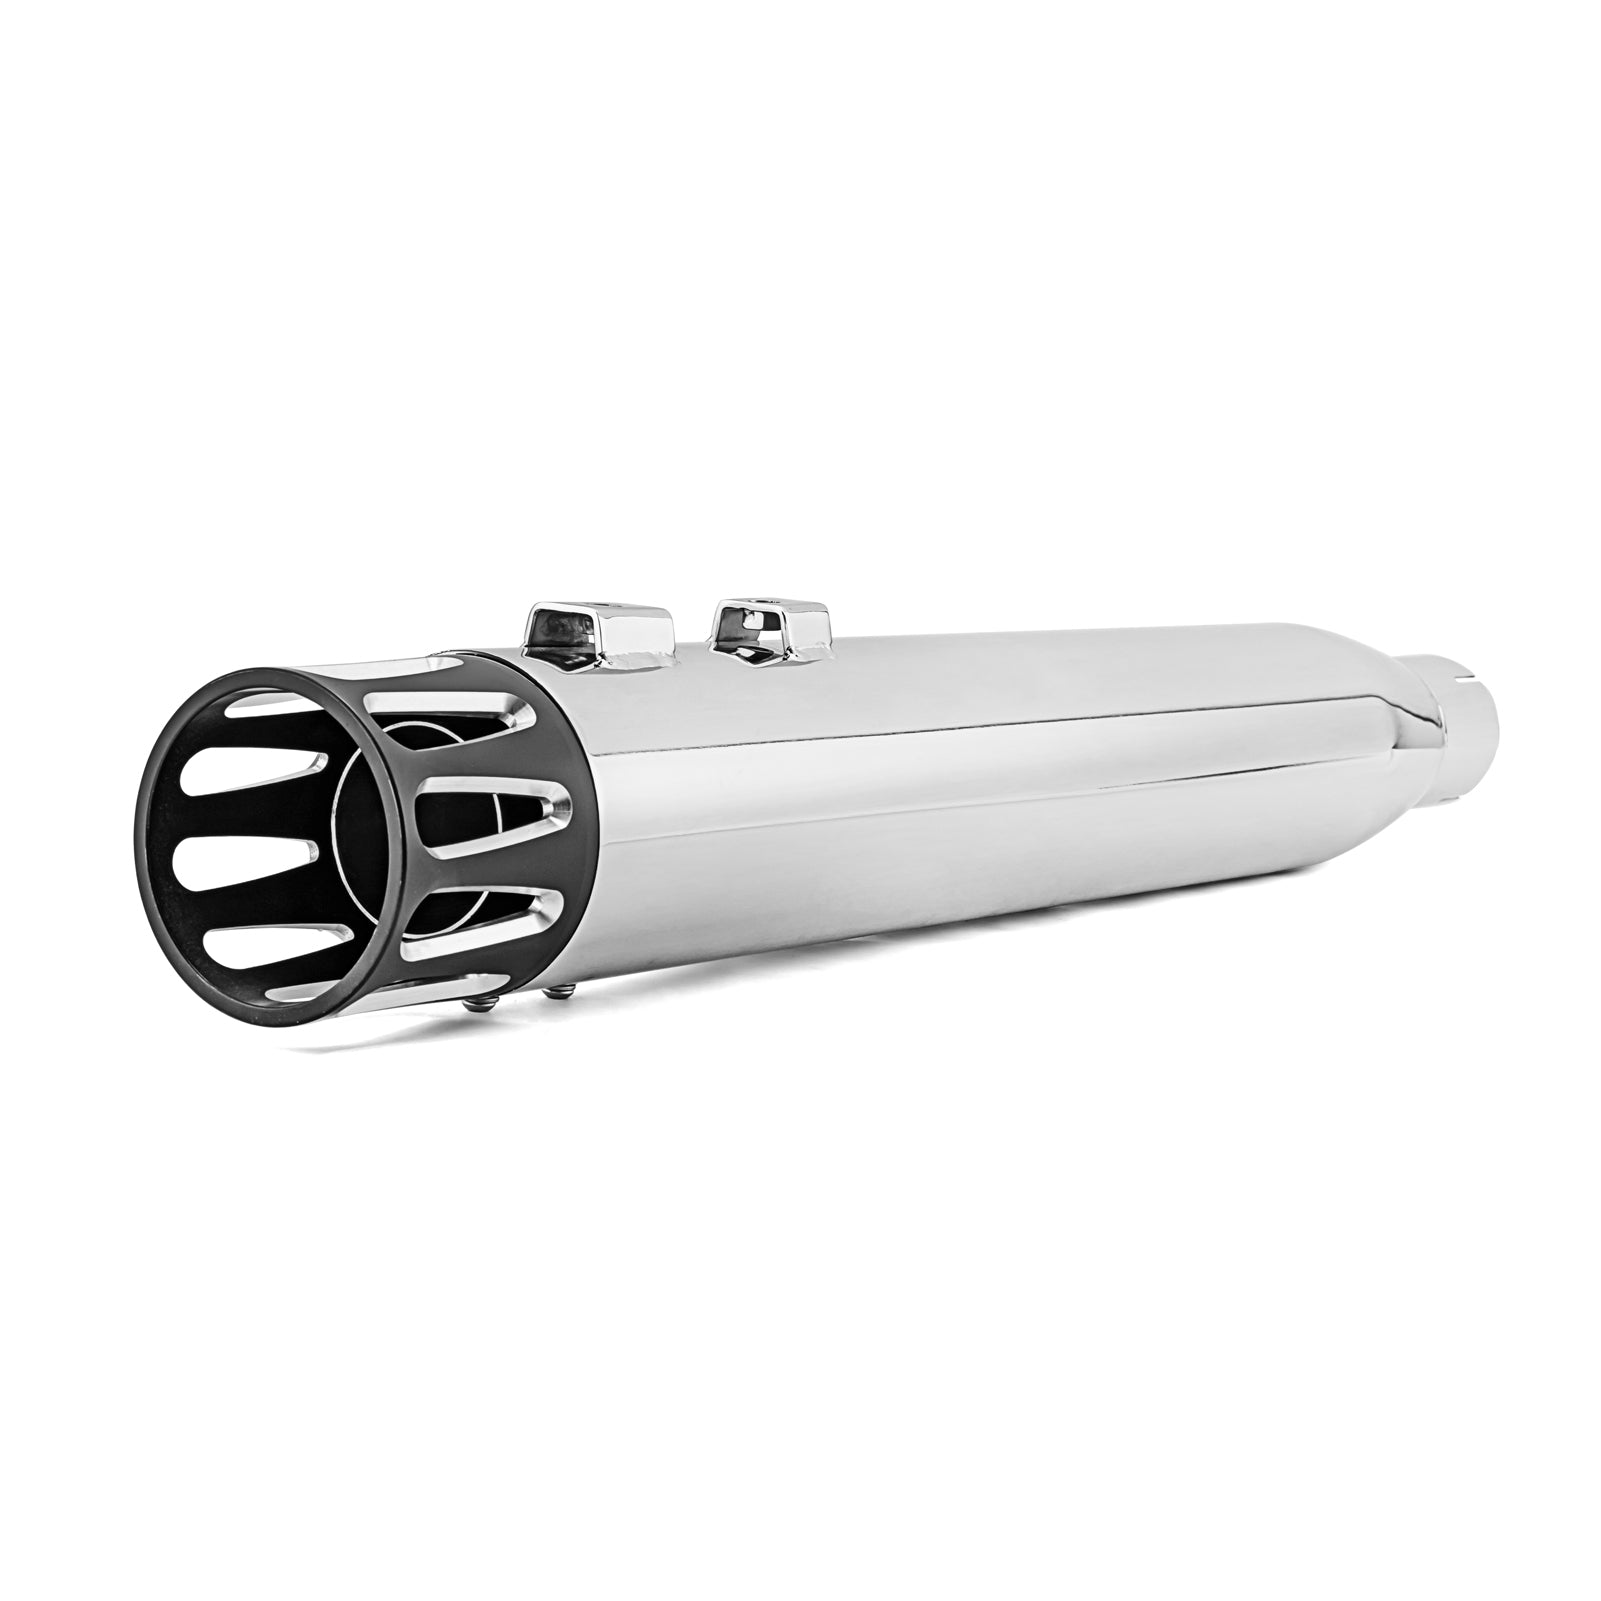 Chrome 4"Slip-On Mufflers Exhaust, Exhaust Pipes For 1995-2016 Harley Davidson Touring